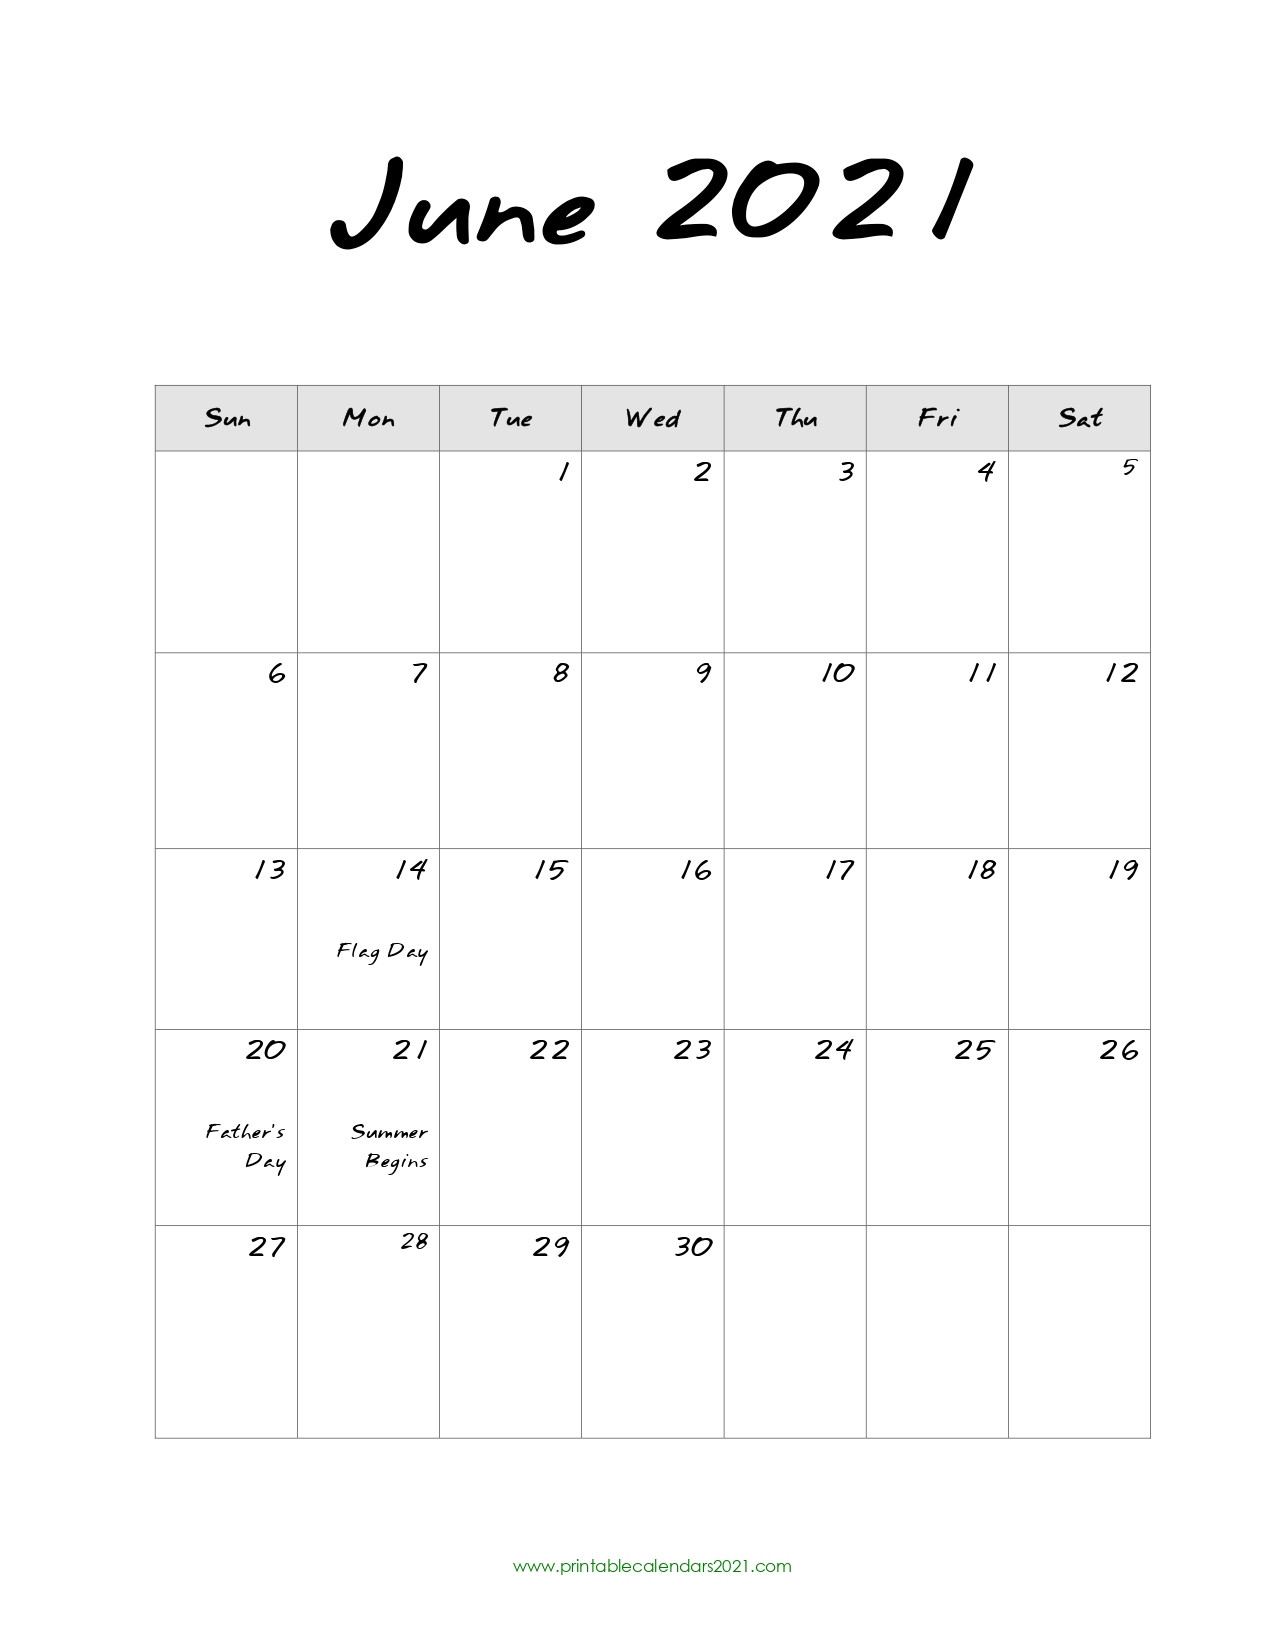 60+ Free June 2021 Calendar Printable With Holidays, Blank-Free 2021 June Calendars That Can Be Edited